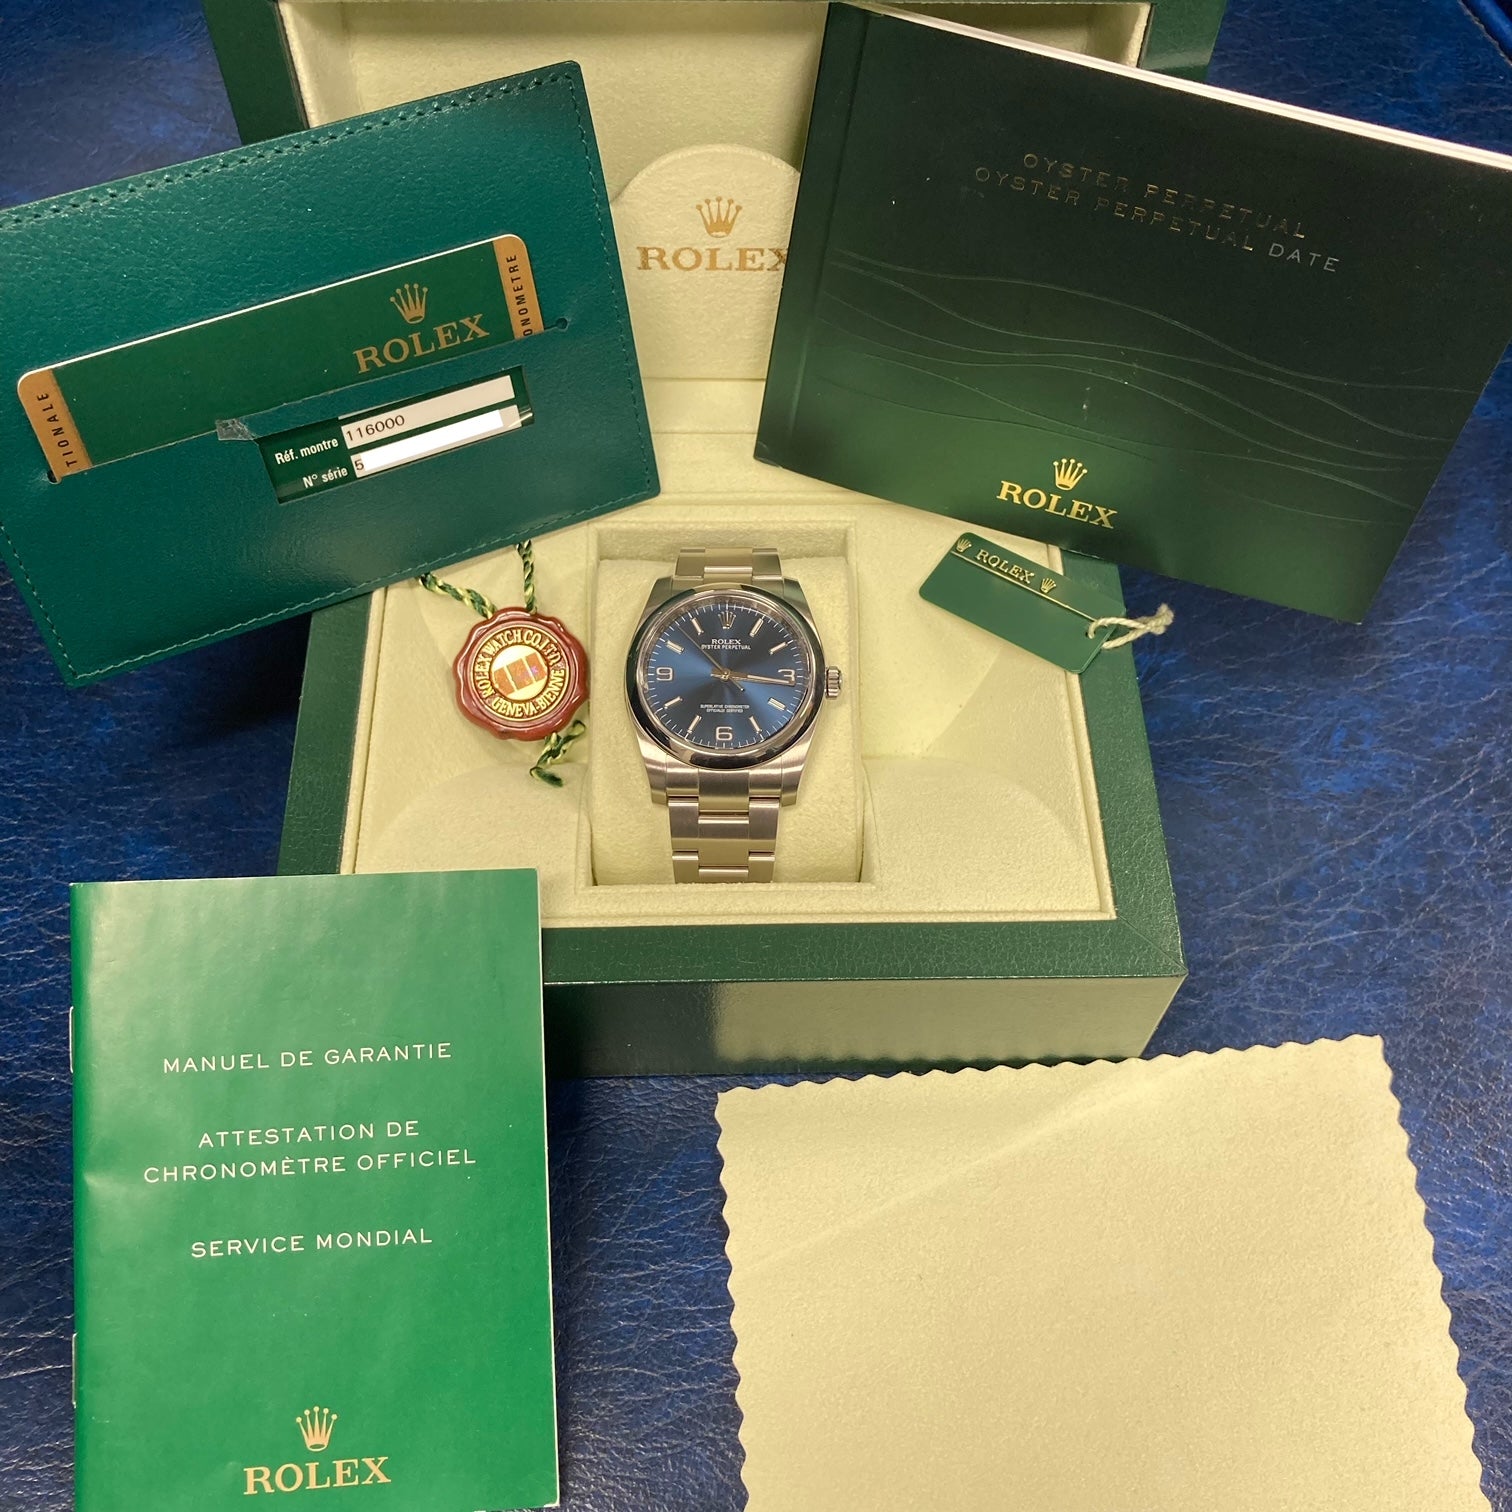 Rolex Oyster Perpetual 36mm Blue Dial Automatic Men's Watch - 116000